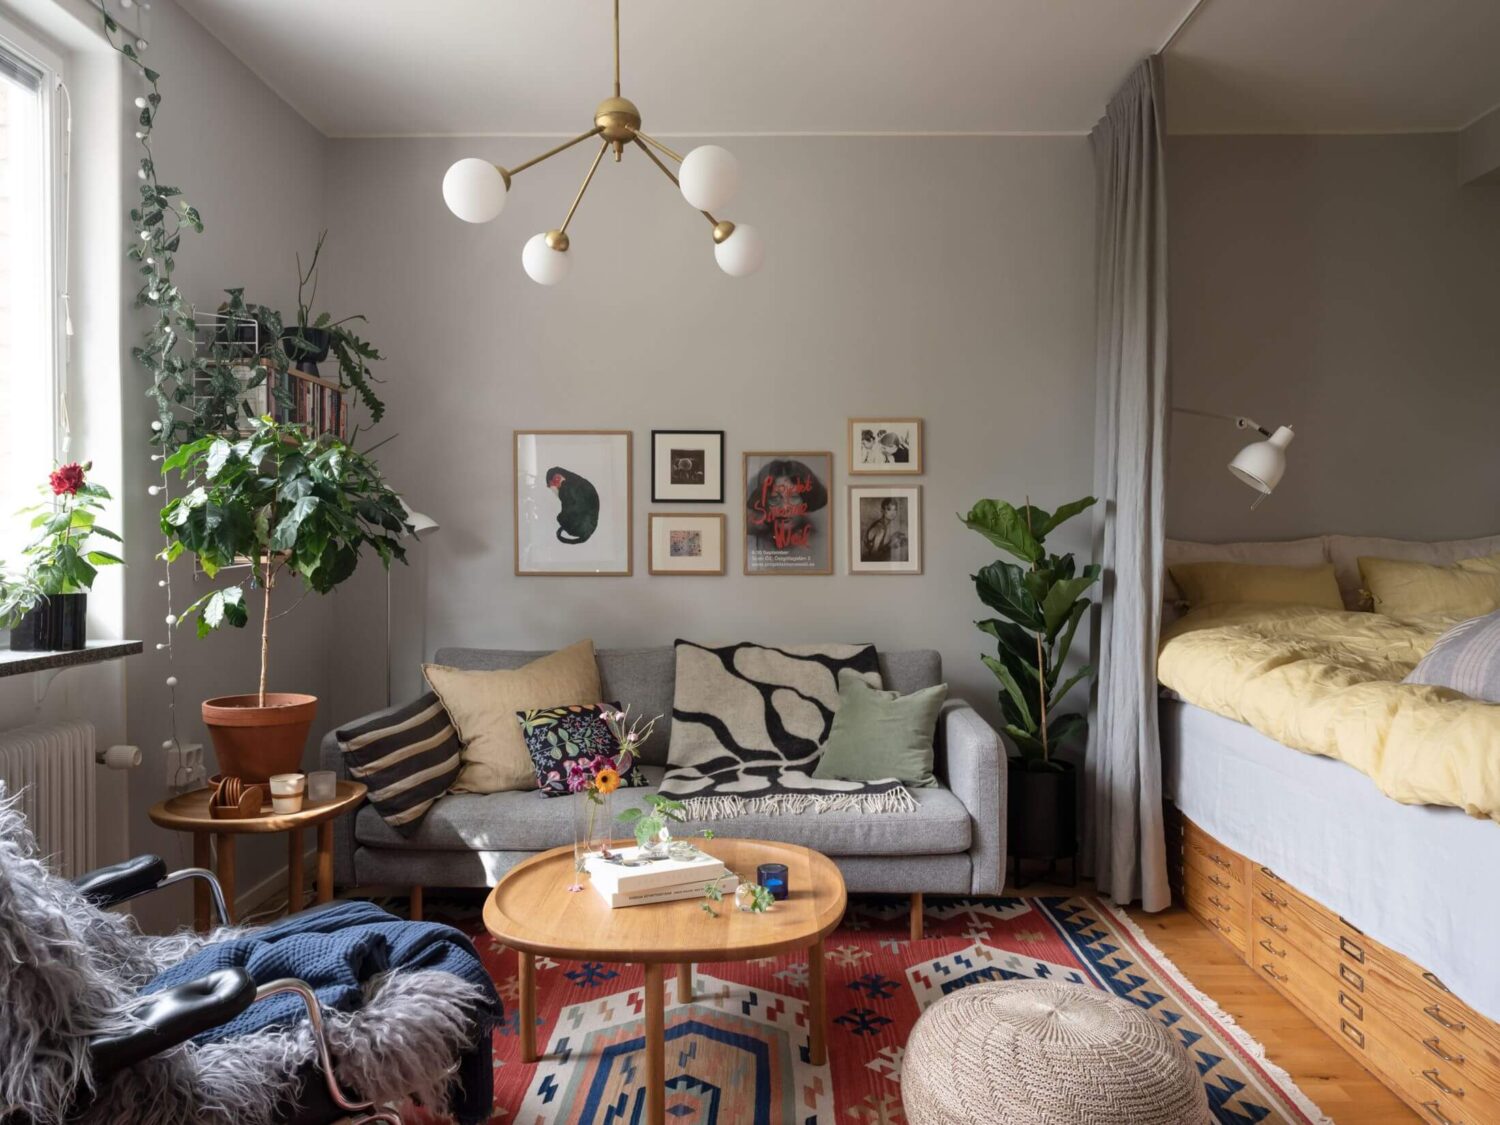 How To Decorate A Studio Apartment - The Nordroom